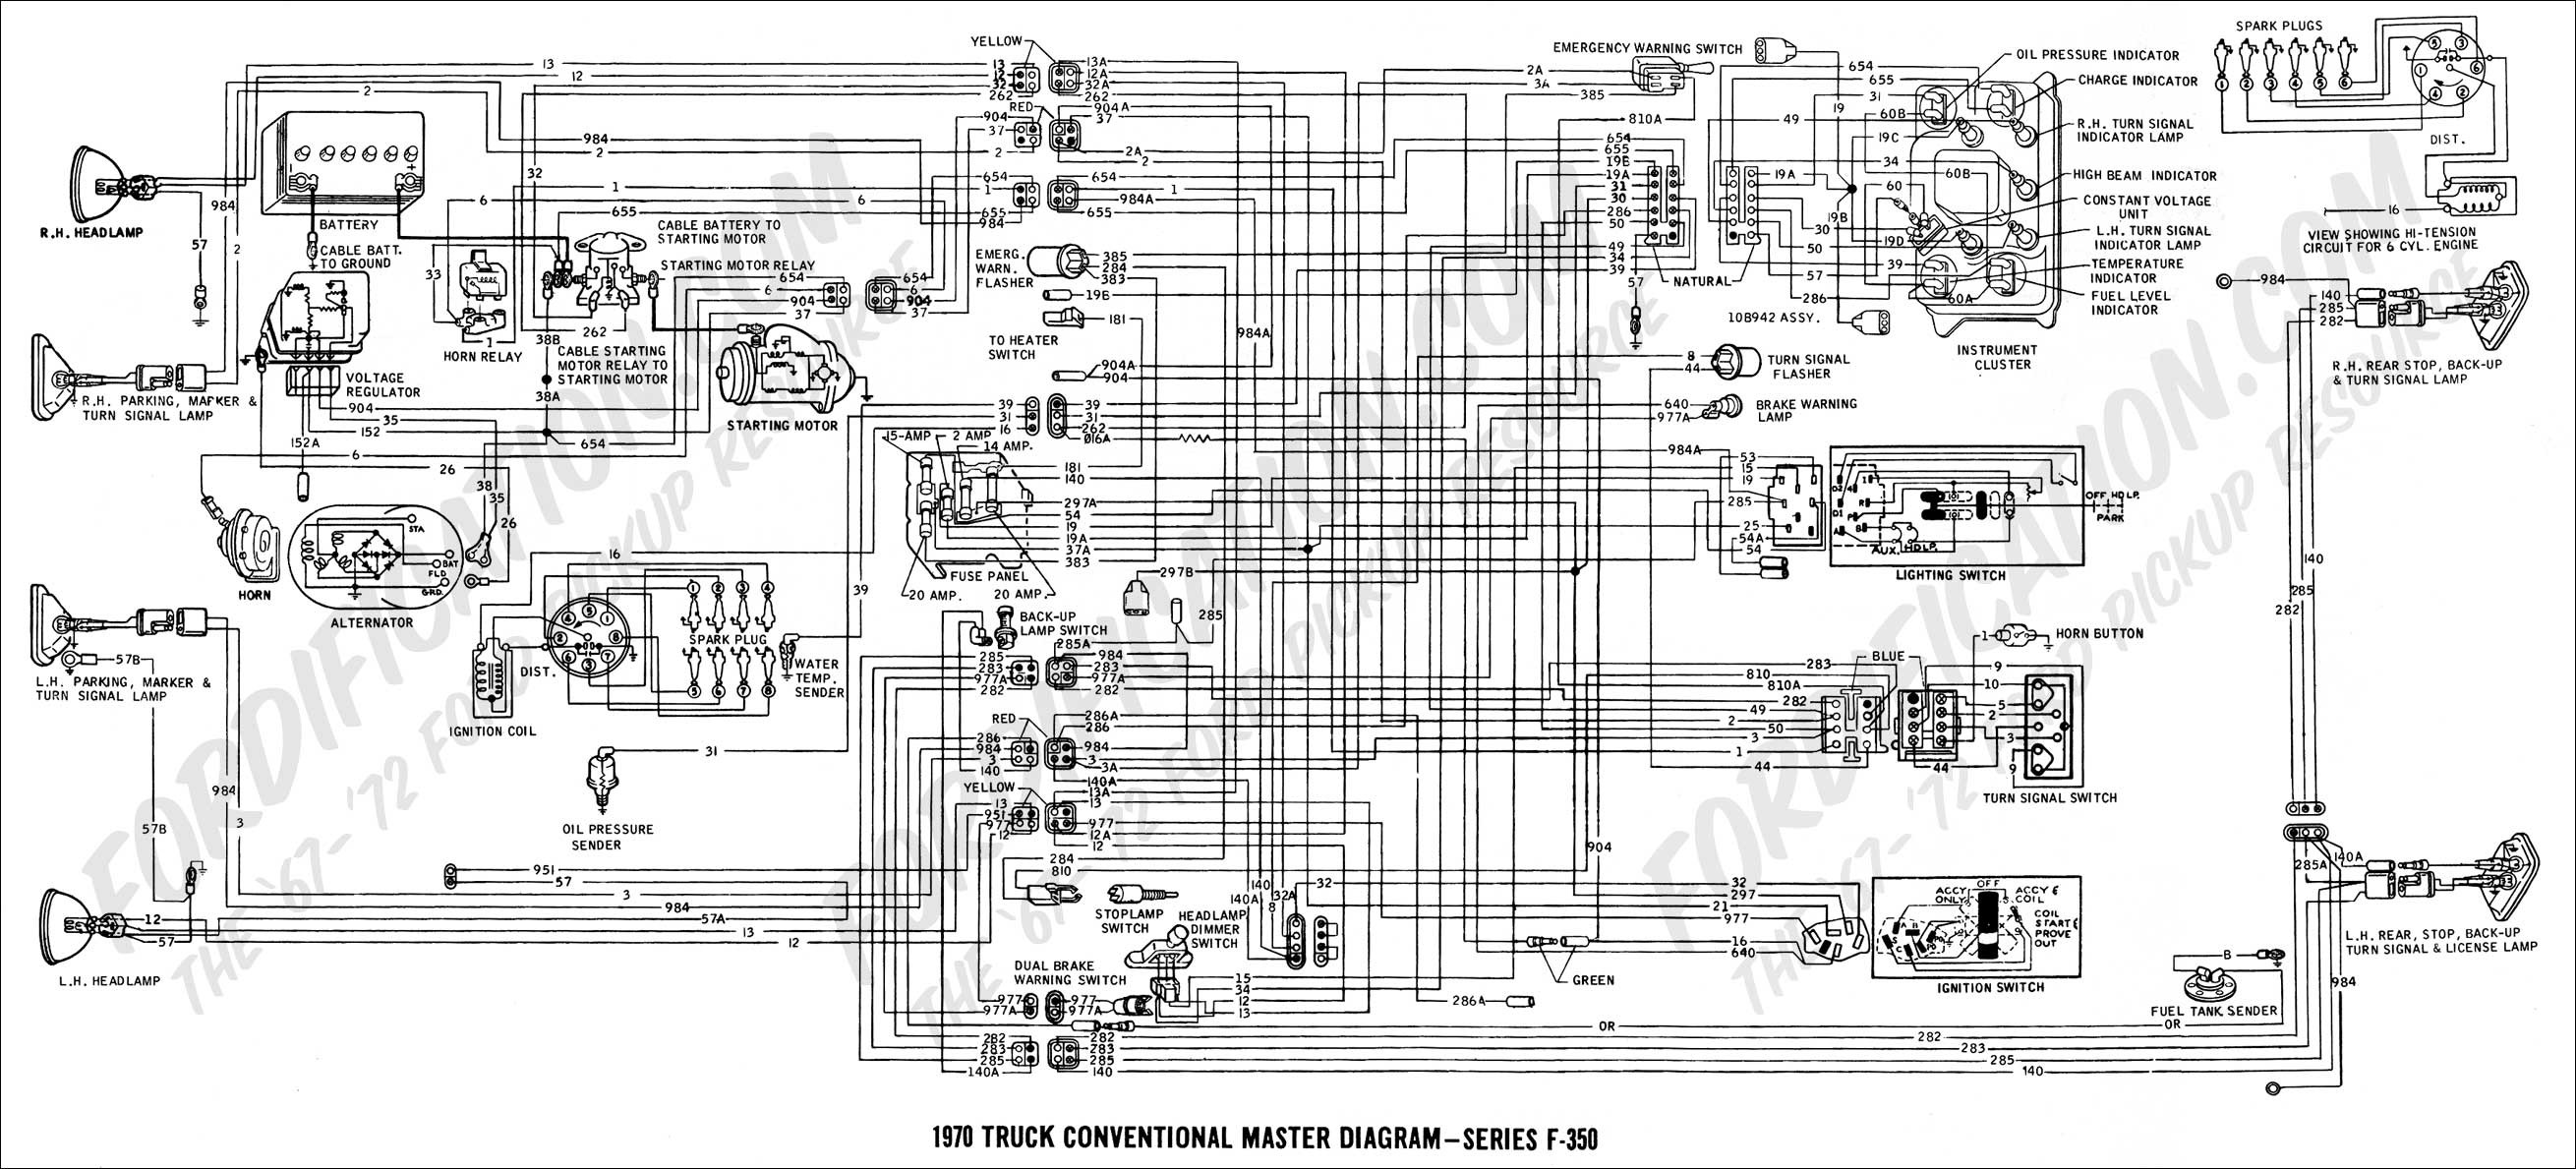 Car Starter Relay Diagram Diagram as Well ford F 350 Wiring Diagram In Addition ford Headlight Of Car Starter Relay Diagram